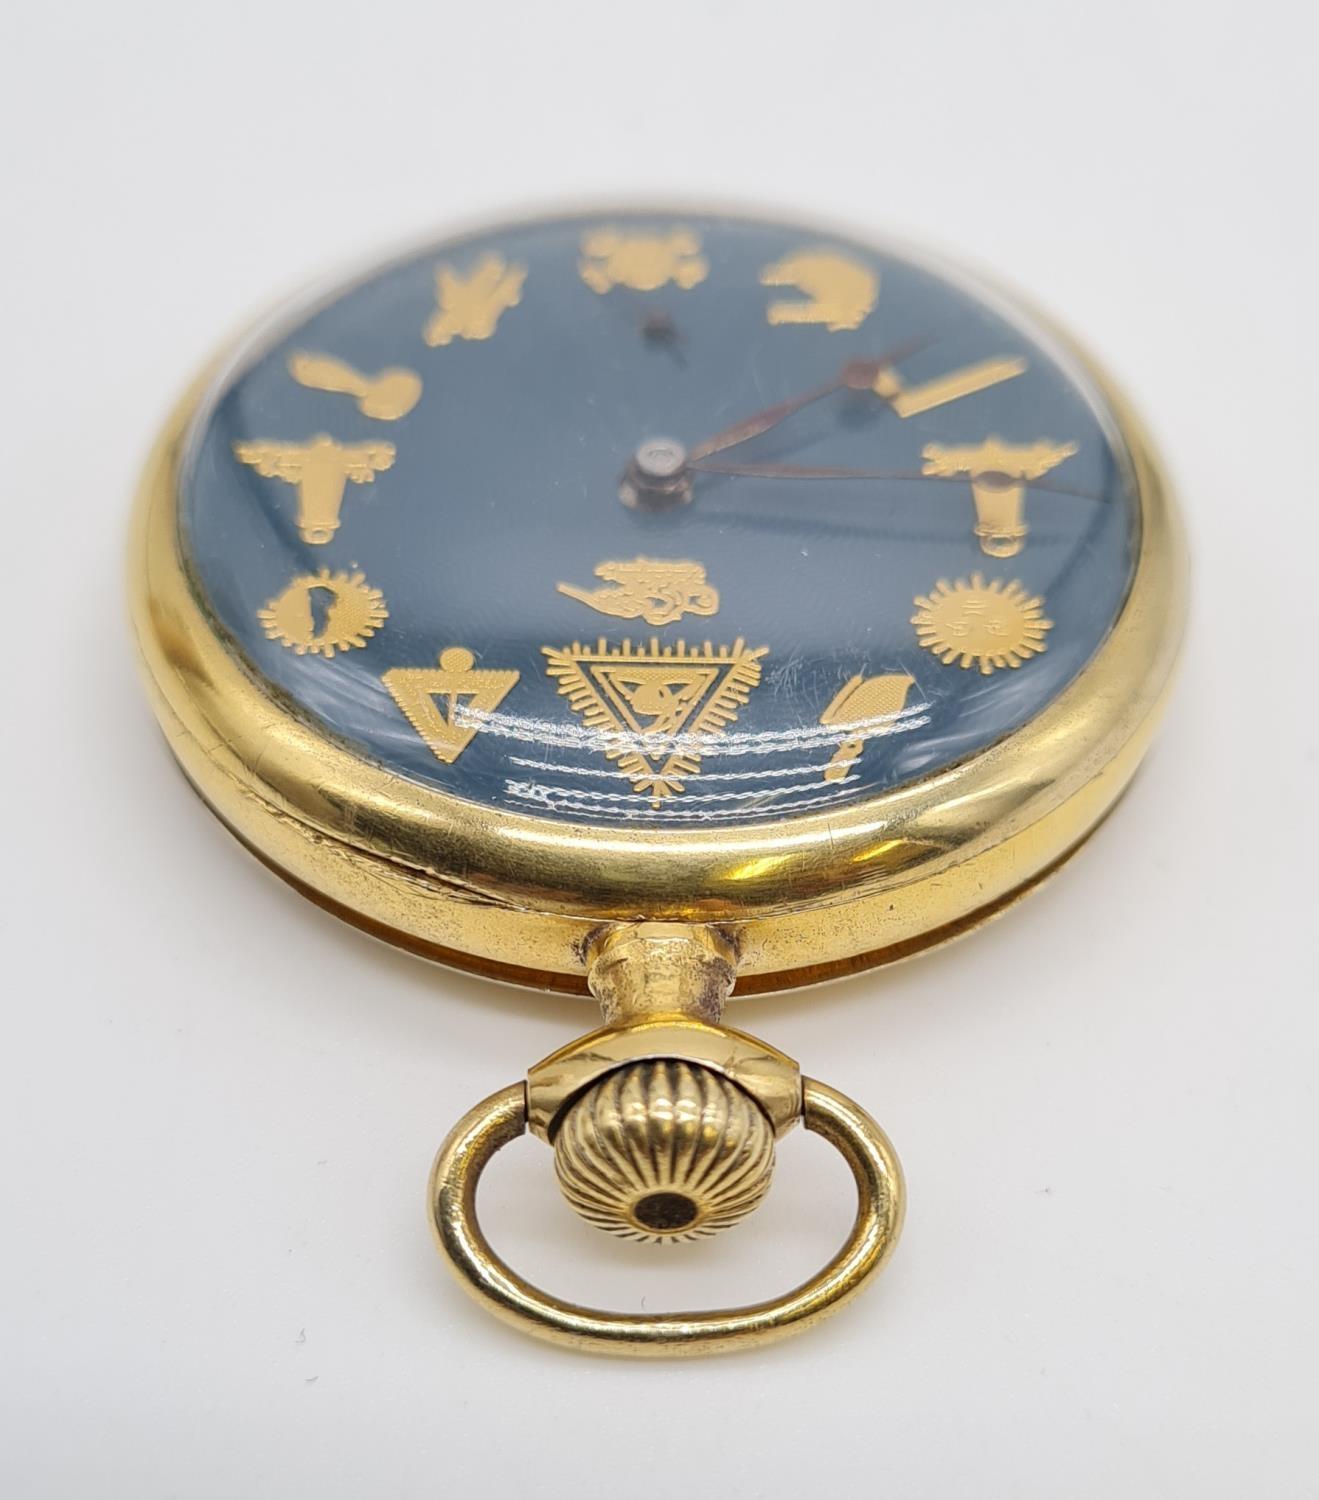 Omega Masonic Pocket Watch with rare Blue face, full working order - Image 4 of 7